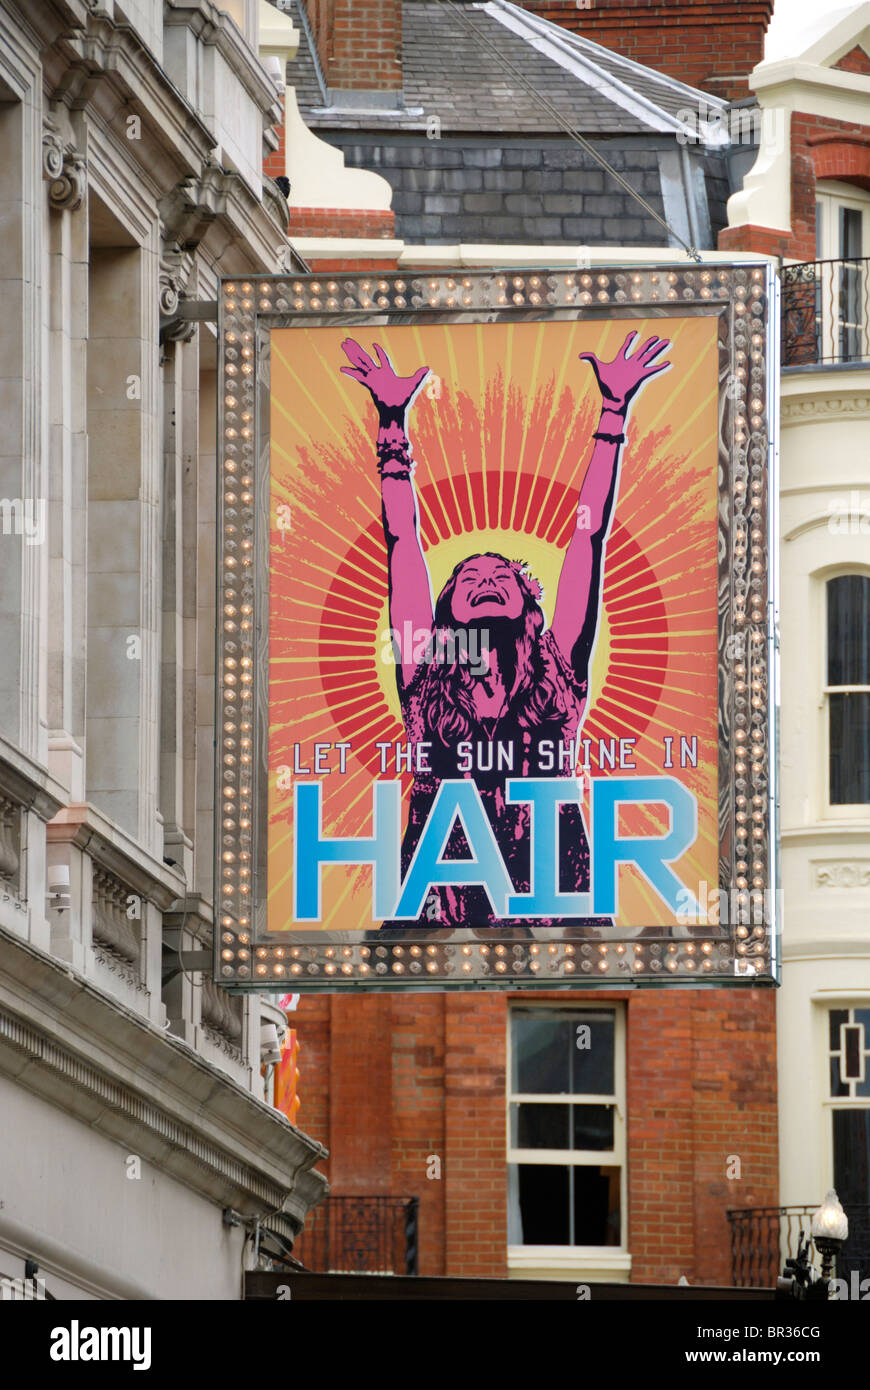 A large billboard promoting the musical 'Hair' outside the Gielgud Theatre, Shaftesbury Avenue, London, England Stock Photo